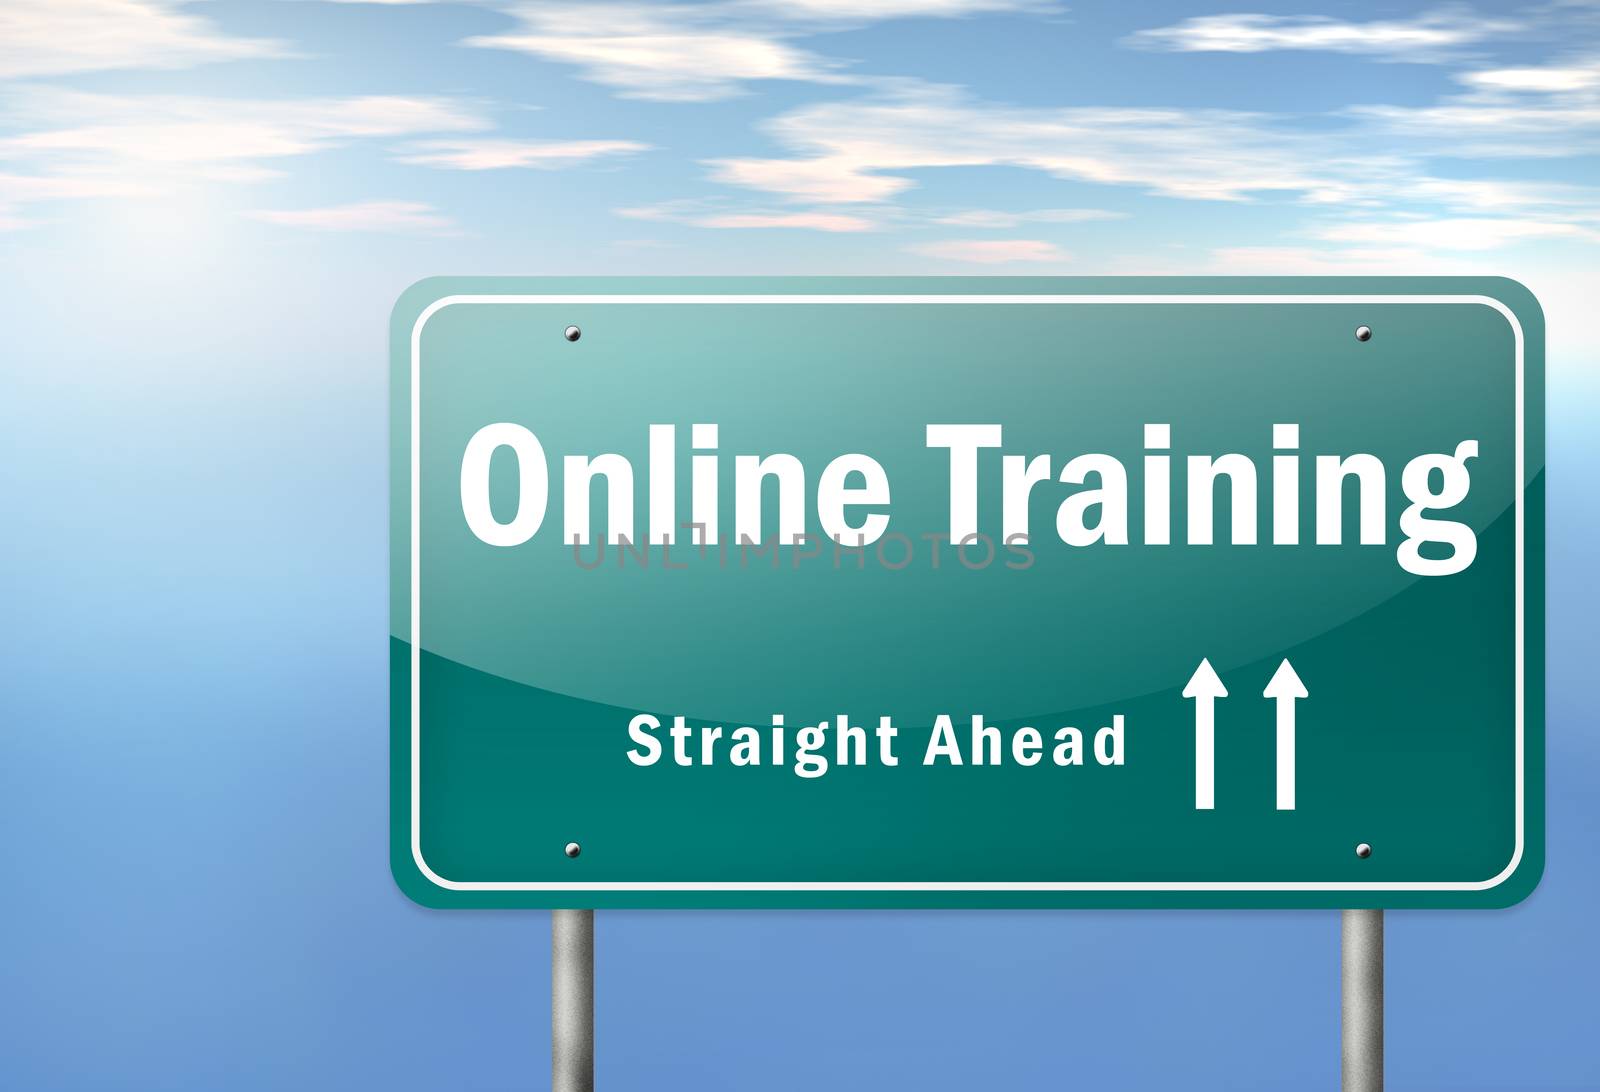 Highway Signpost with Online Training wording